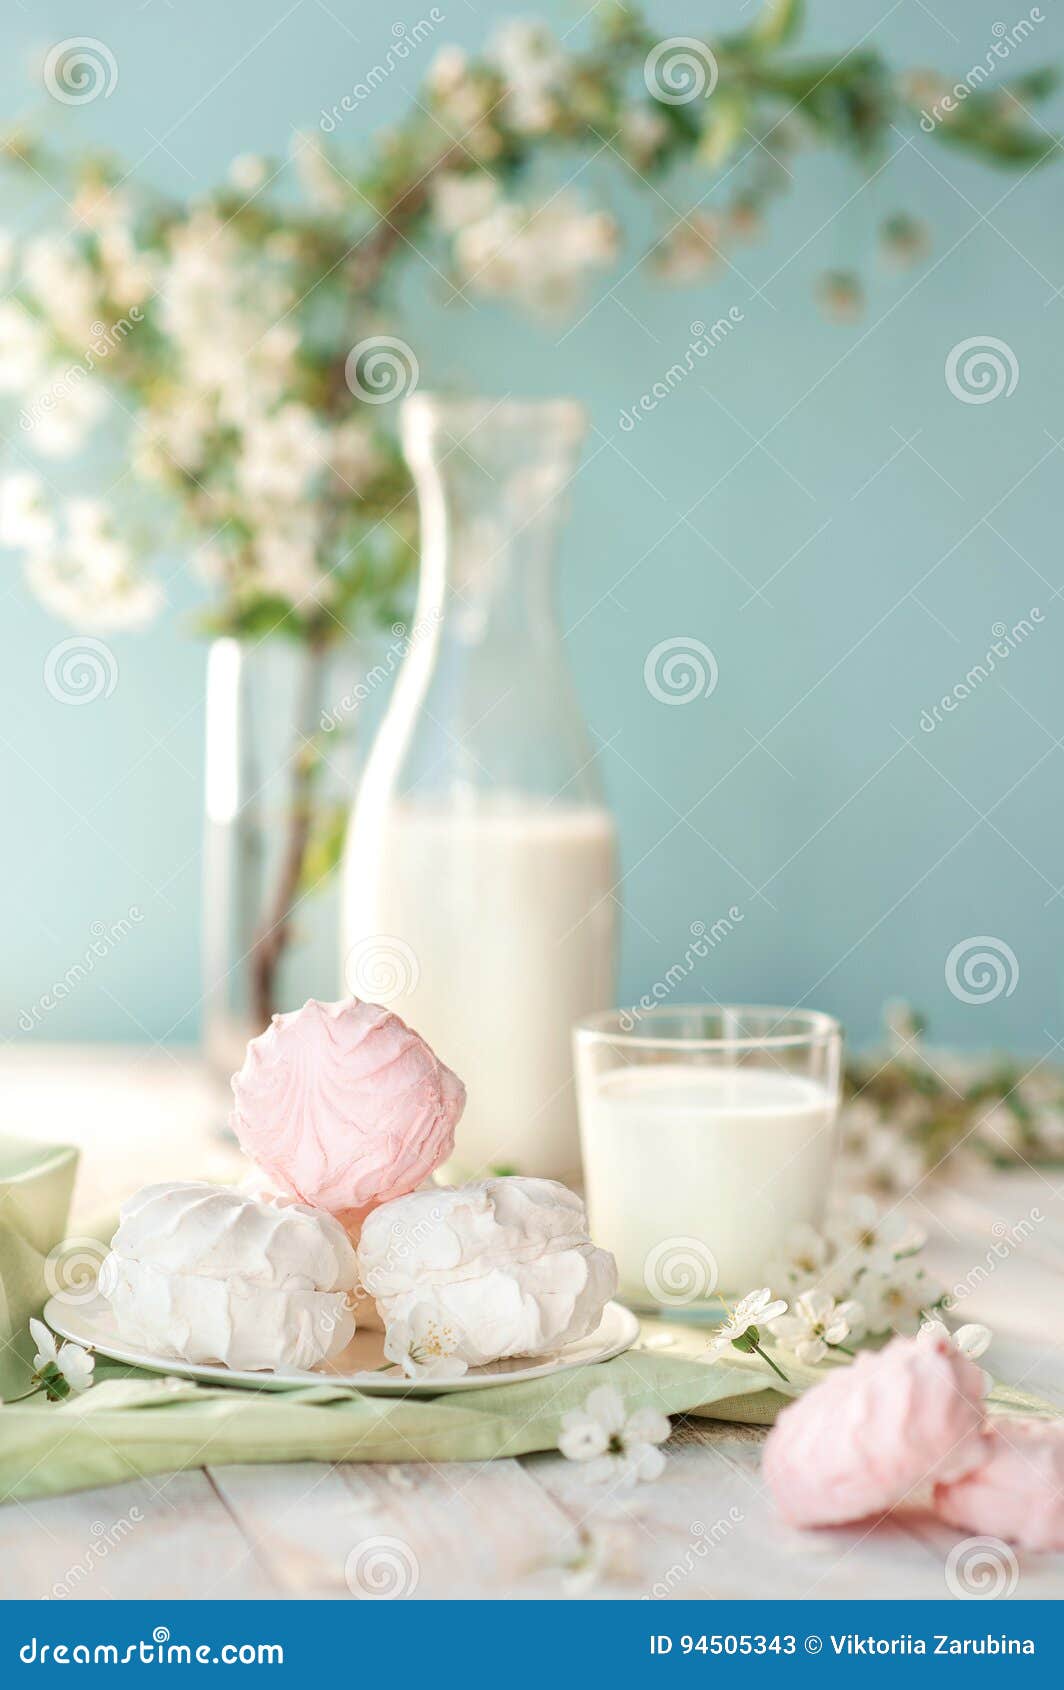 Good Morning Russian Marshmallow Or Zephyr With Bottle And Glass